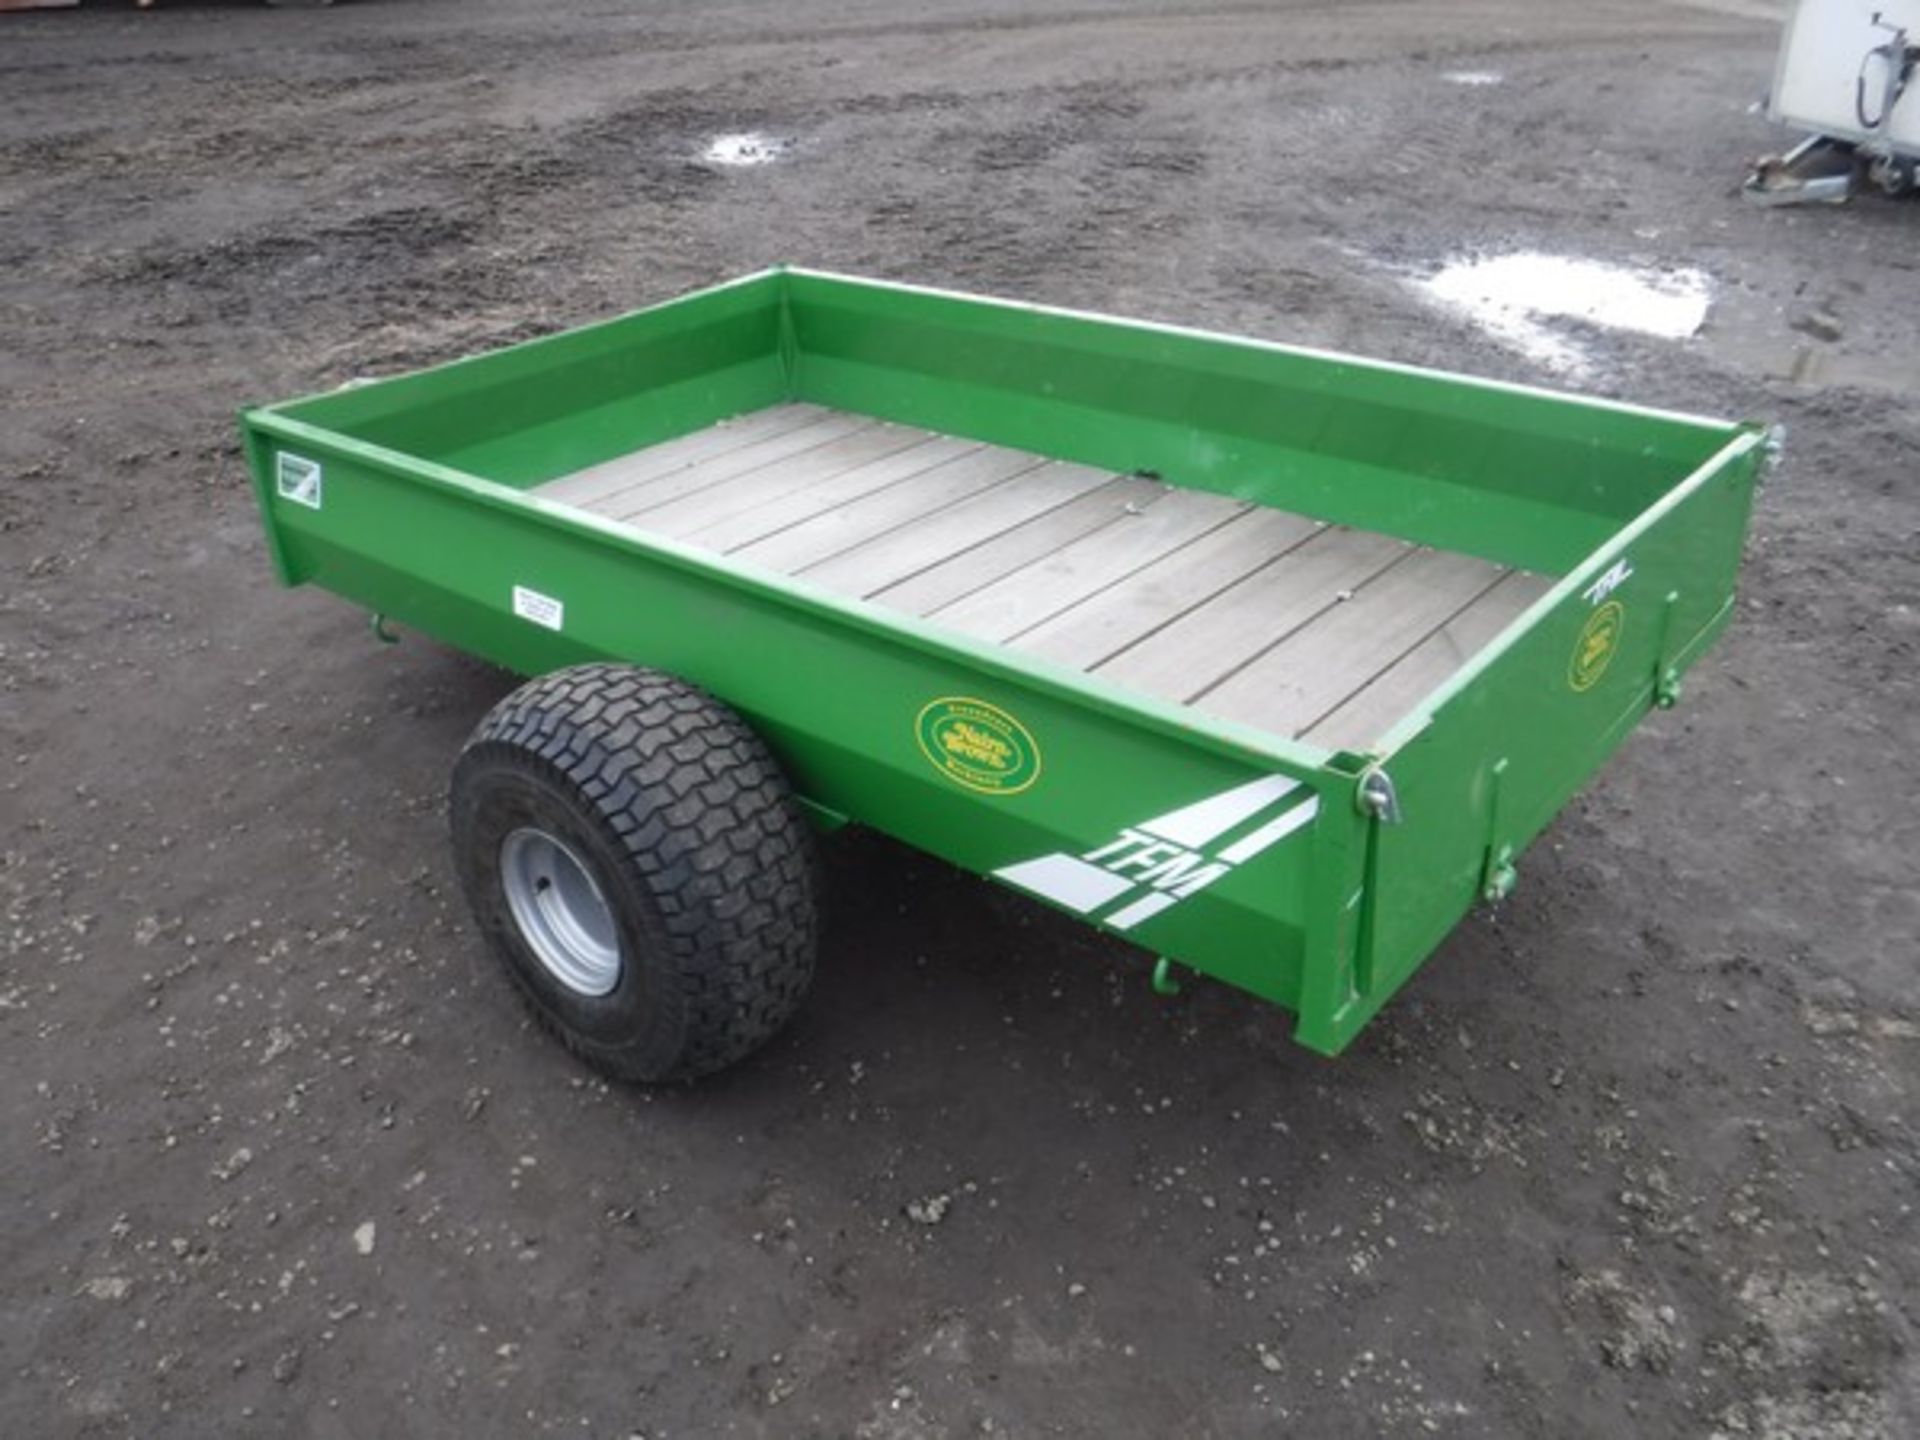 TFM GROUNDS TRAILER, ID 6433, SINGLE AXLE - Image 4 of 6